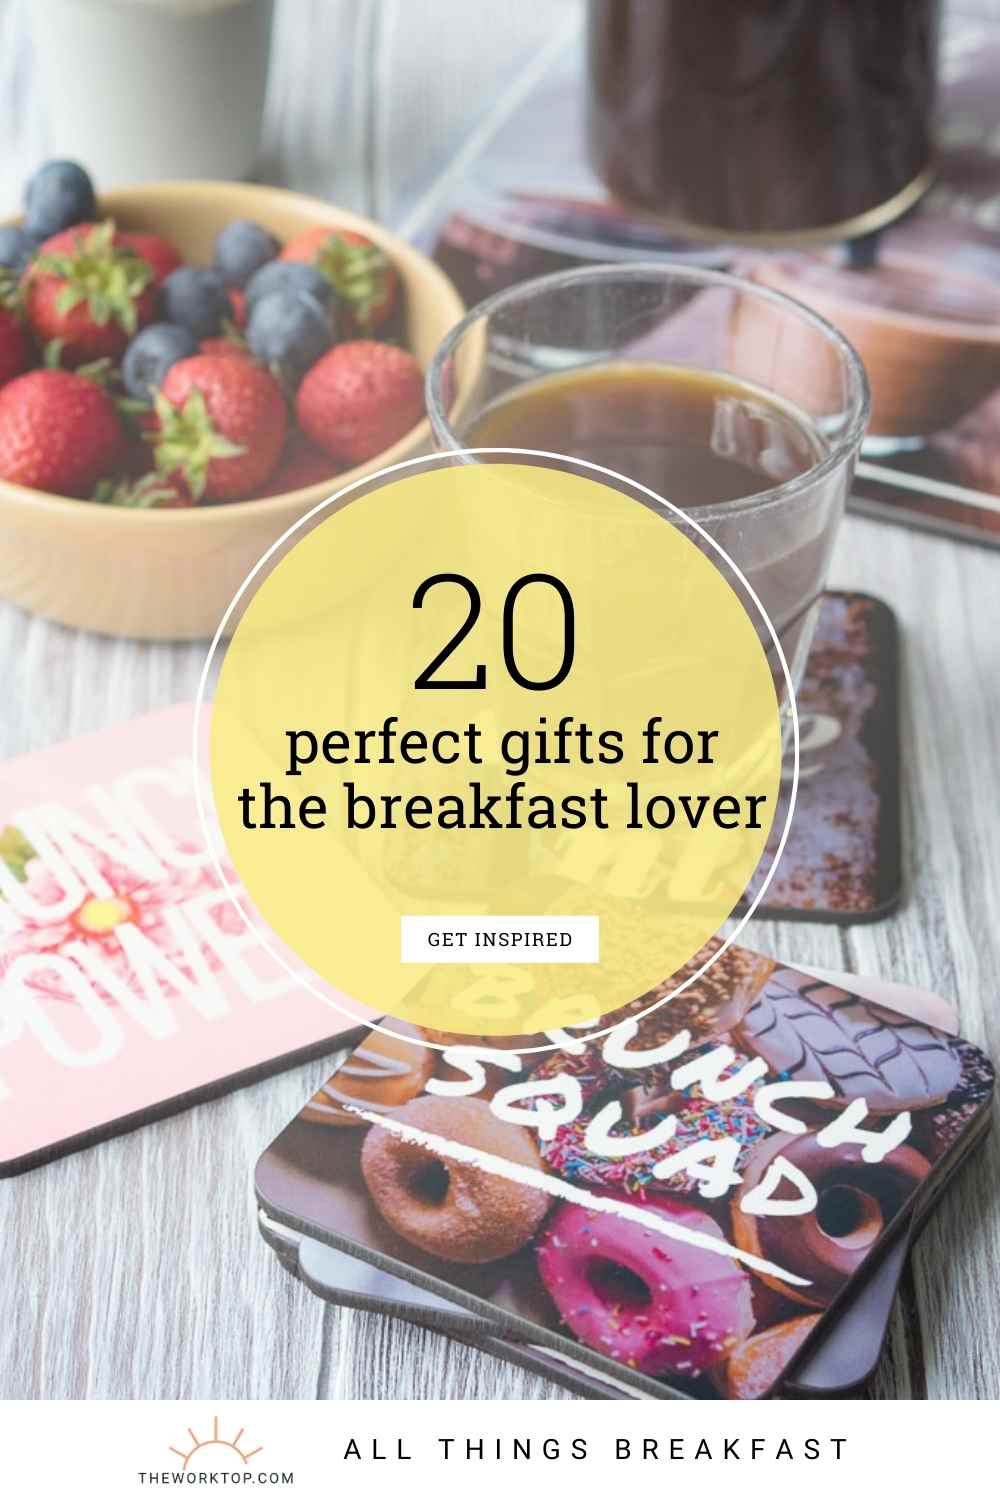 20 perfect gifts for the breakfast lover with text